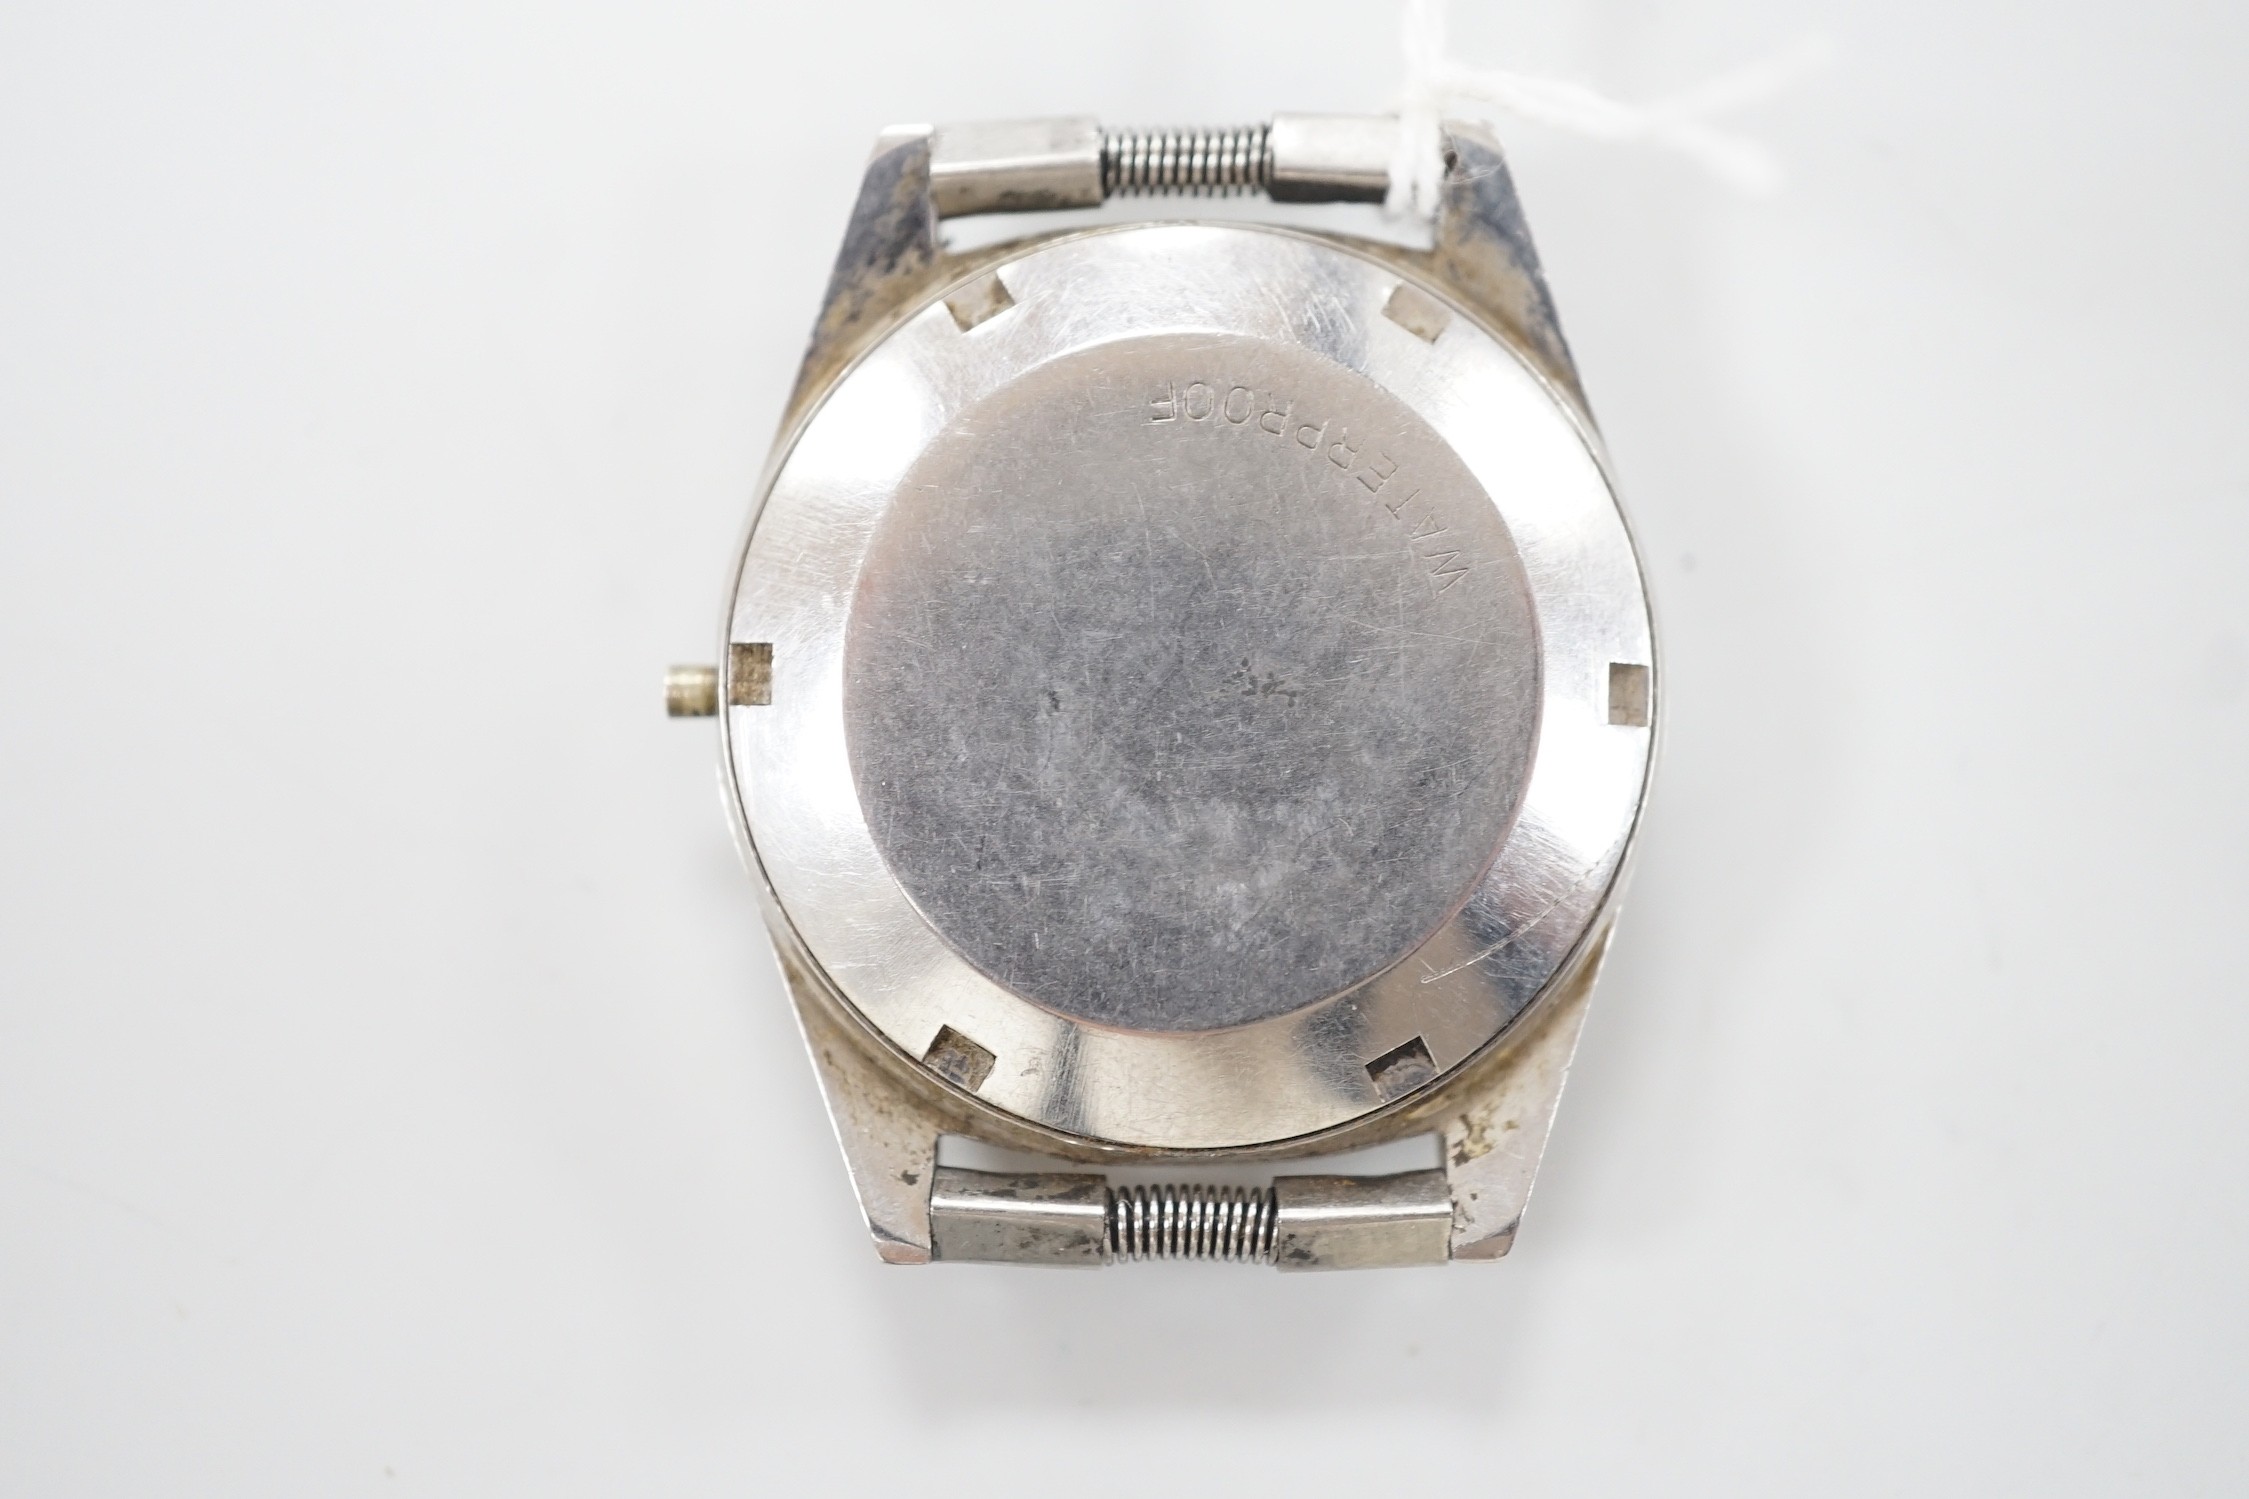 A gentleman's late 1960's stainless steel Omega manual wind wrist watch, movement c. 552 (rust in movement), case diameter 35mm, lacking winding crown, no strap.